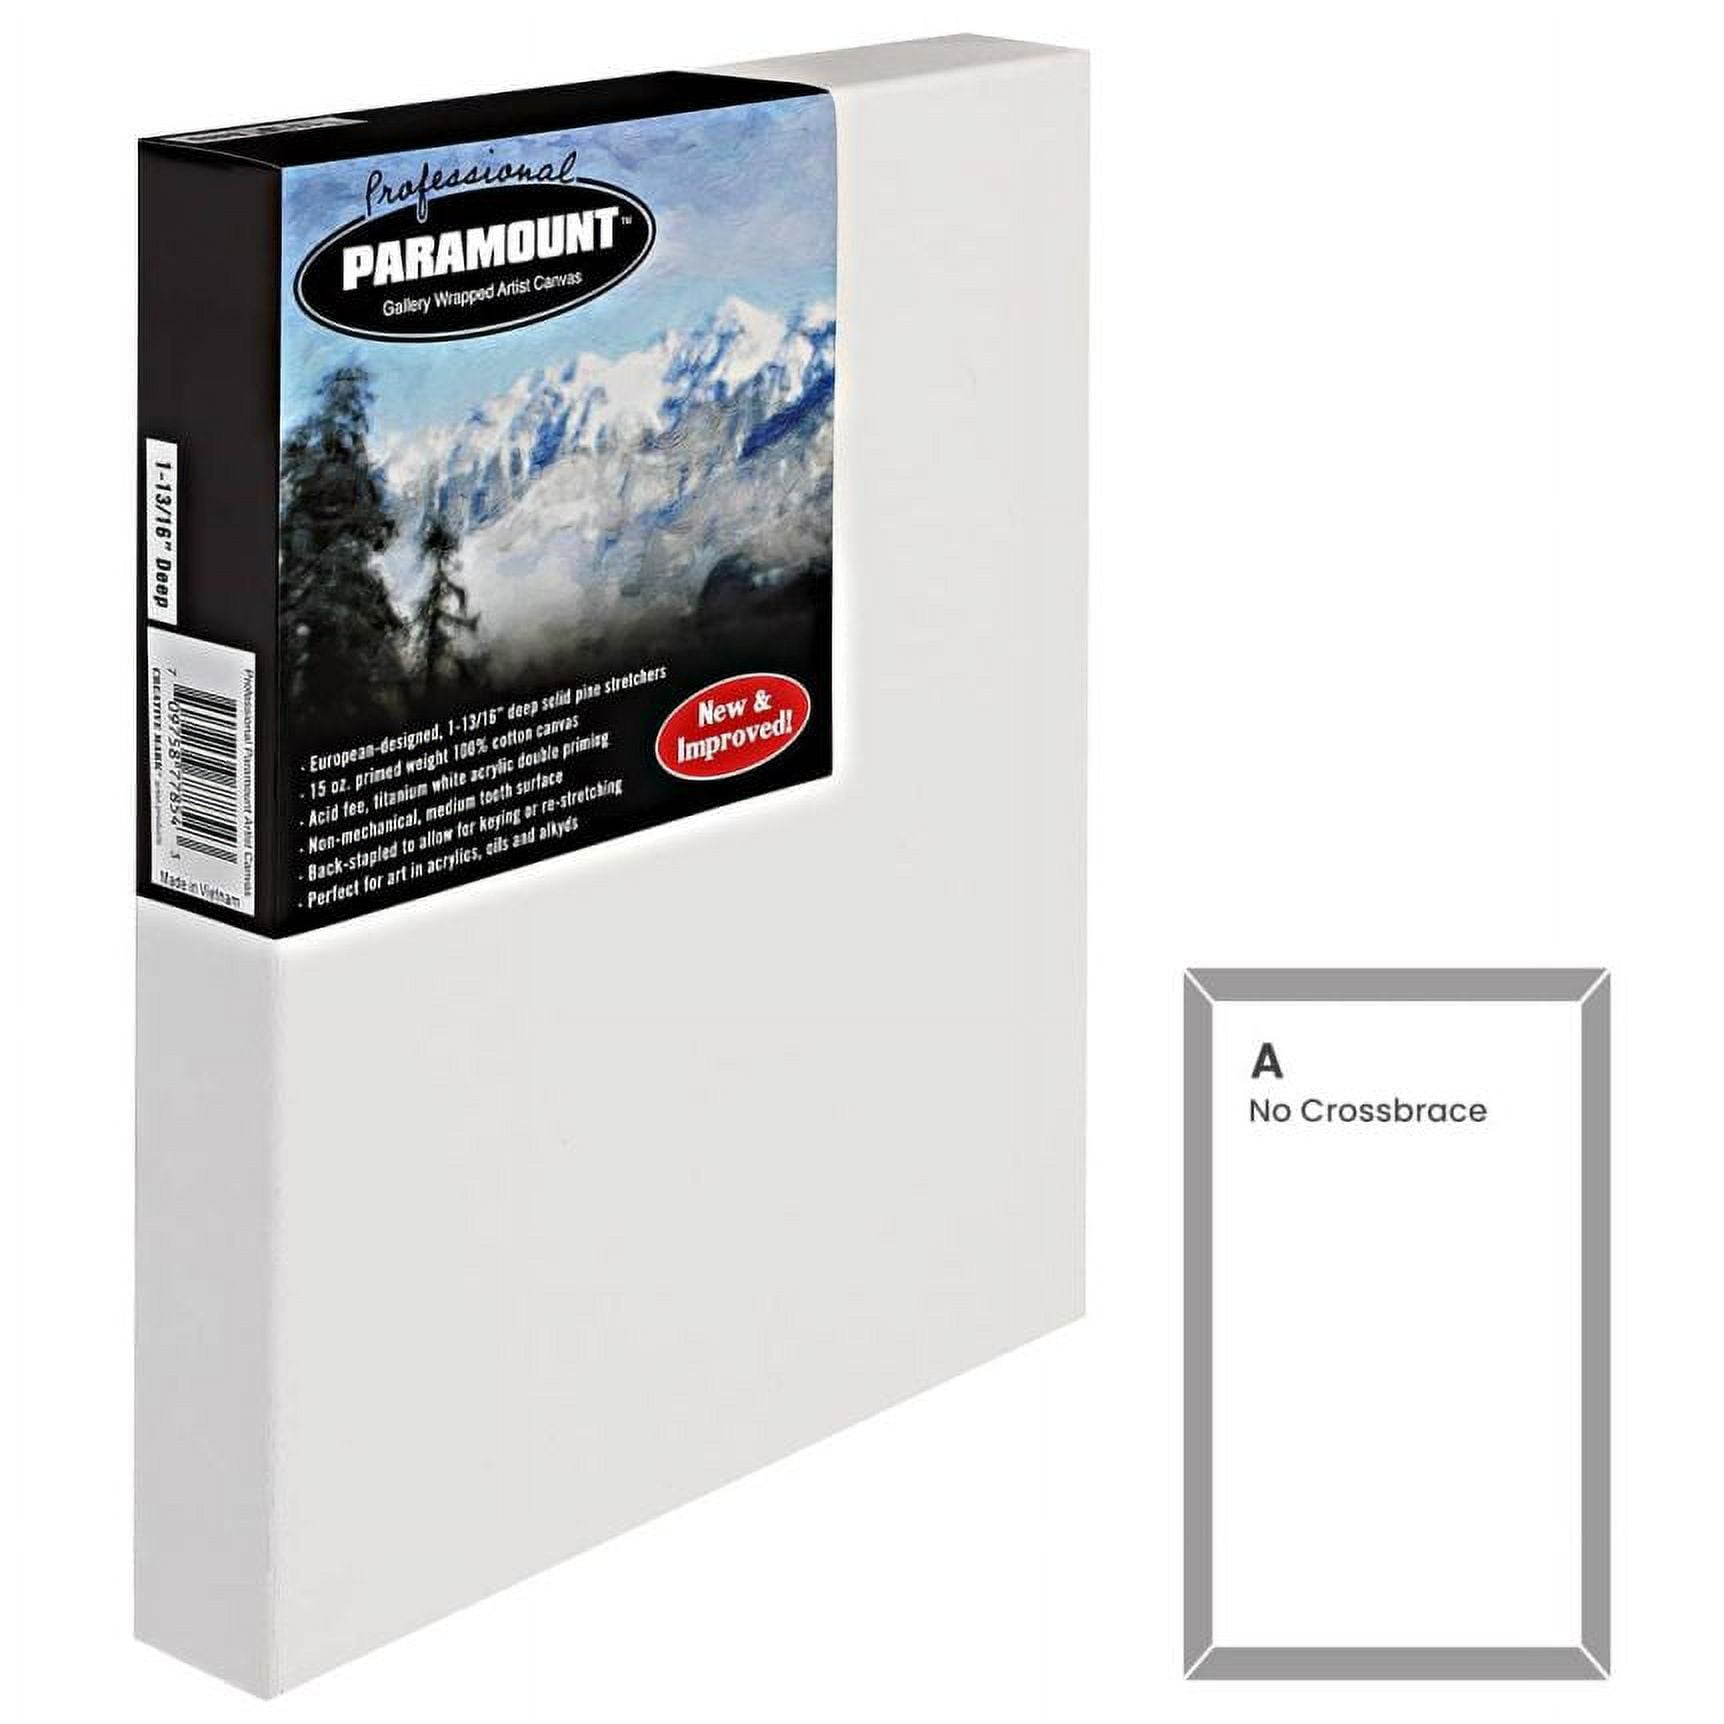  PHOENIX Extra Large Blank Canvas 30x40 Inch - 3 Pack